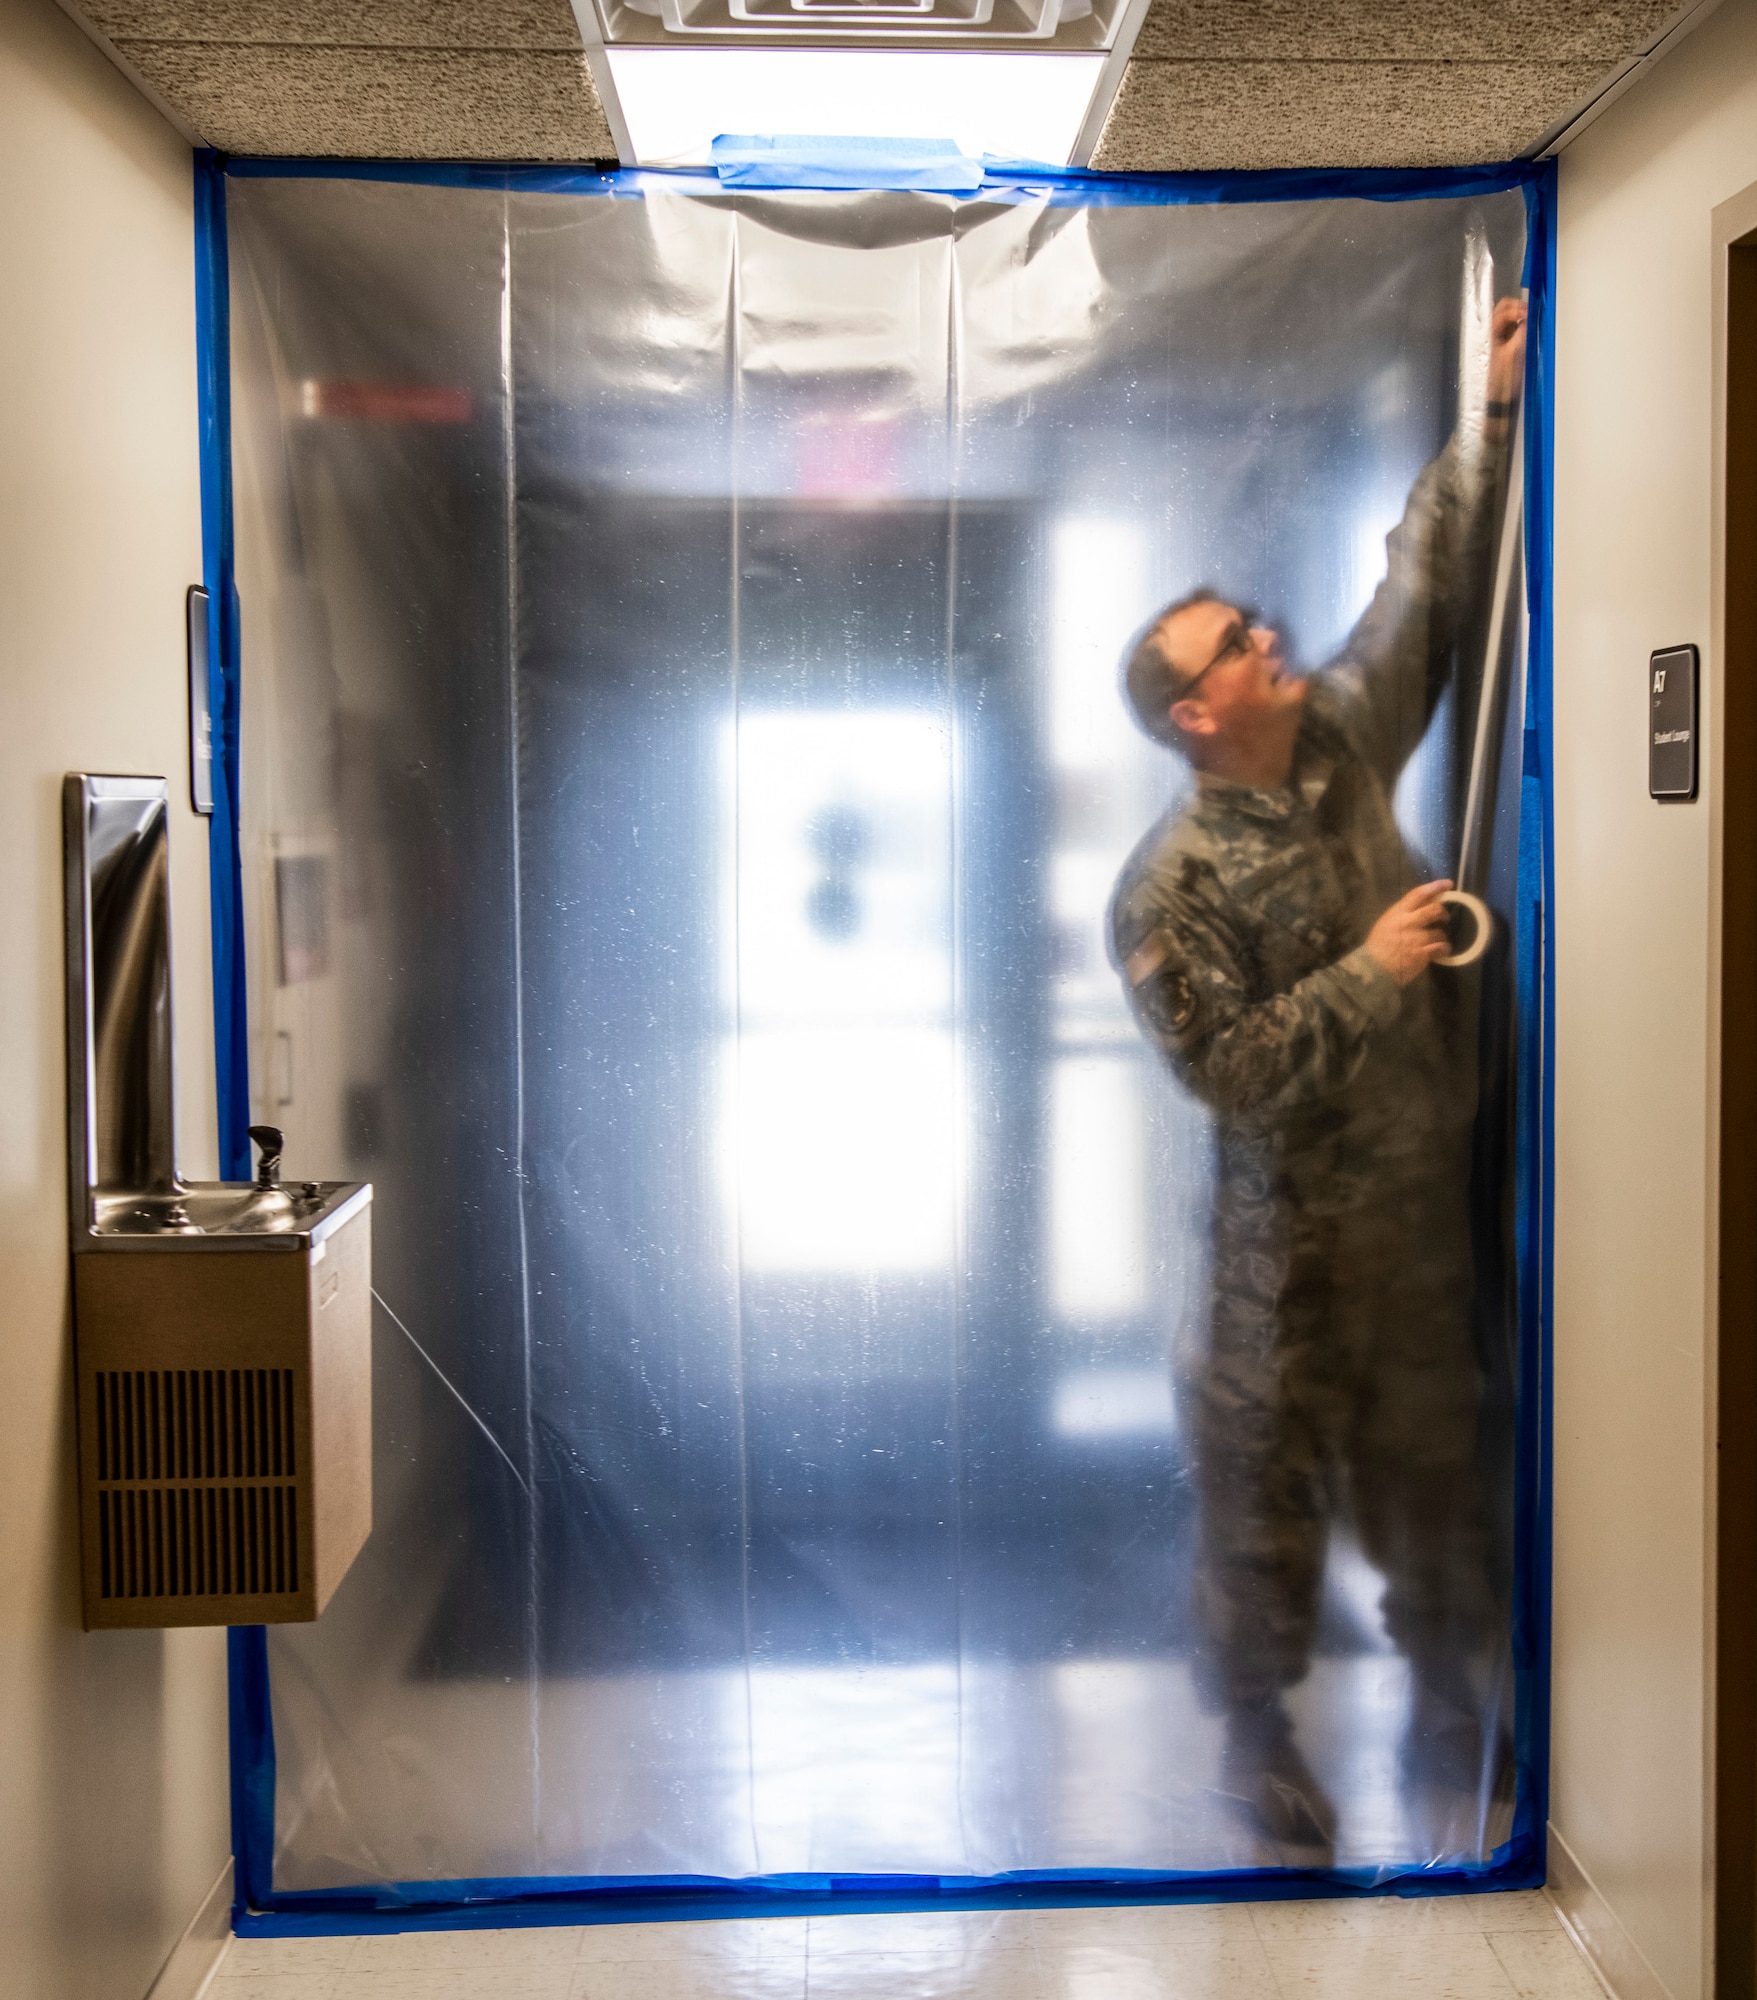 Master Sgt. Jonathan Platt, 436th Operational Medical Readiness Squadron dental flight chief, tapes up the hallway at Dover Air Force Base, Delaware, March 30, 2020. Platt helped tape hallway entrances to section off areas within the dental clinic to be used for potential COVID-19 patients. Dover AFB medical personnel continue to care for Airmen and their families, while supporting state and national response efforts. (U.S. Air Force photo by Senior Airman Christopher Quail)